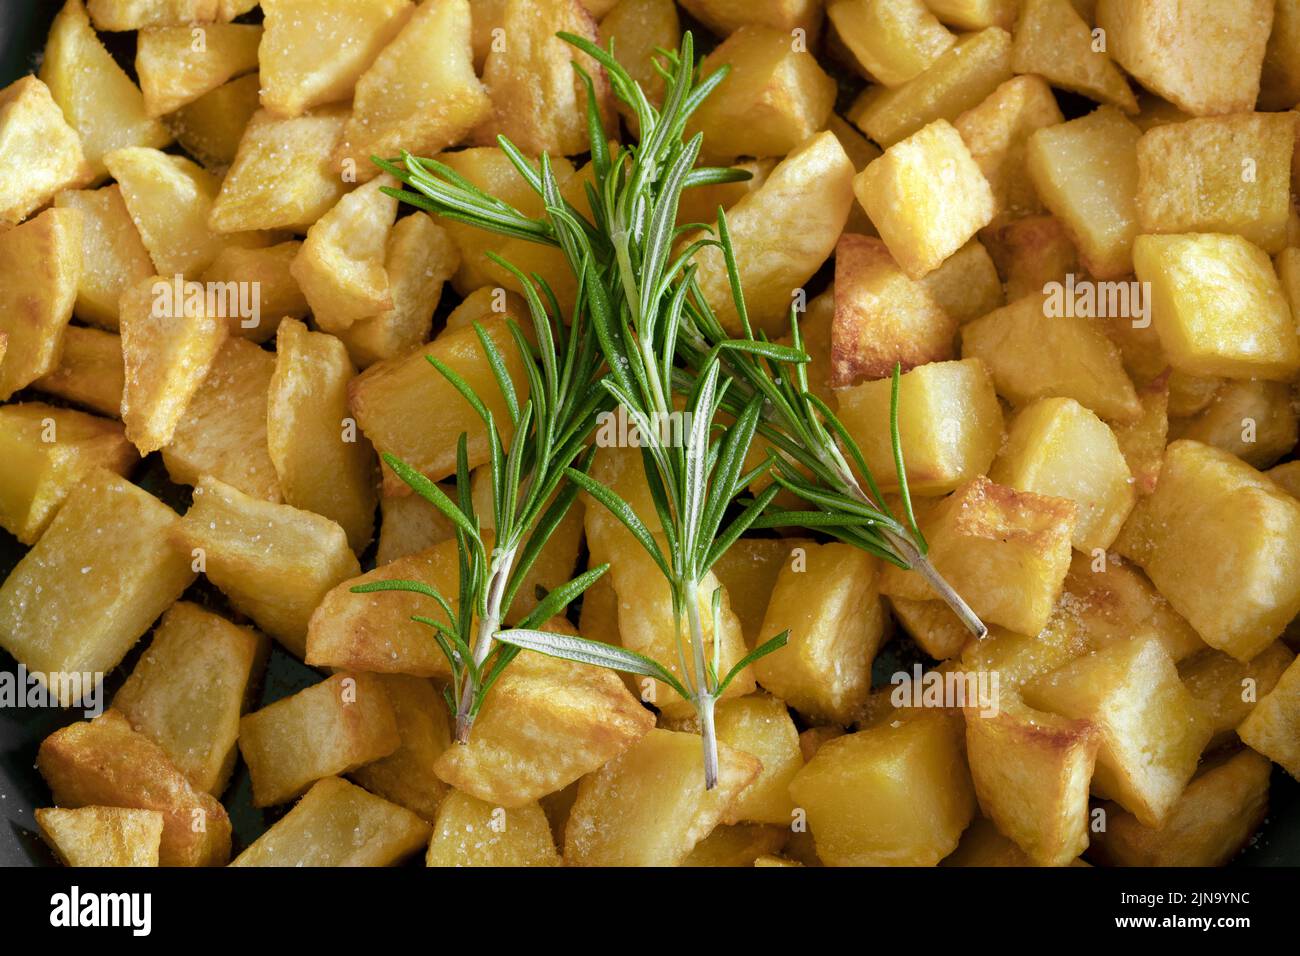 Macro close-up of a rosemary sprig with homemade baked potatoes on the background. Stock Photo